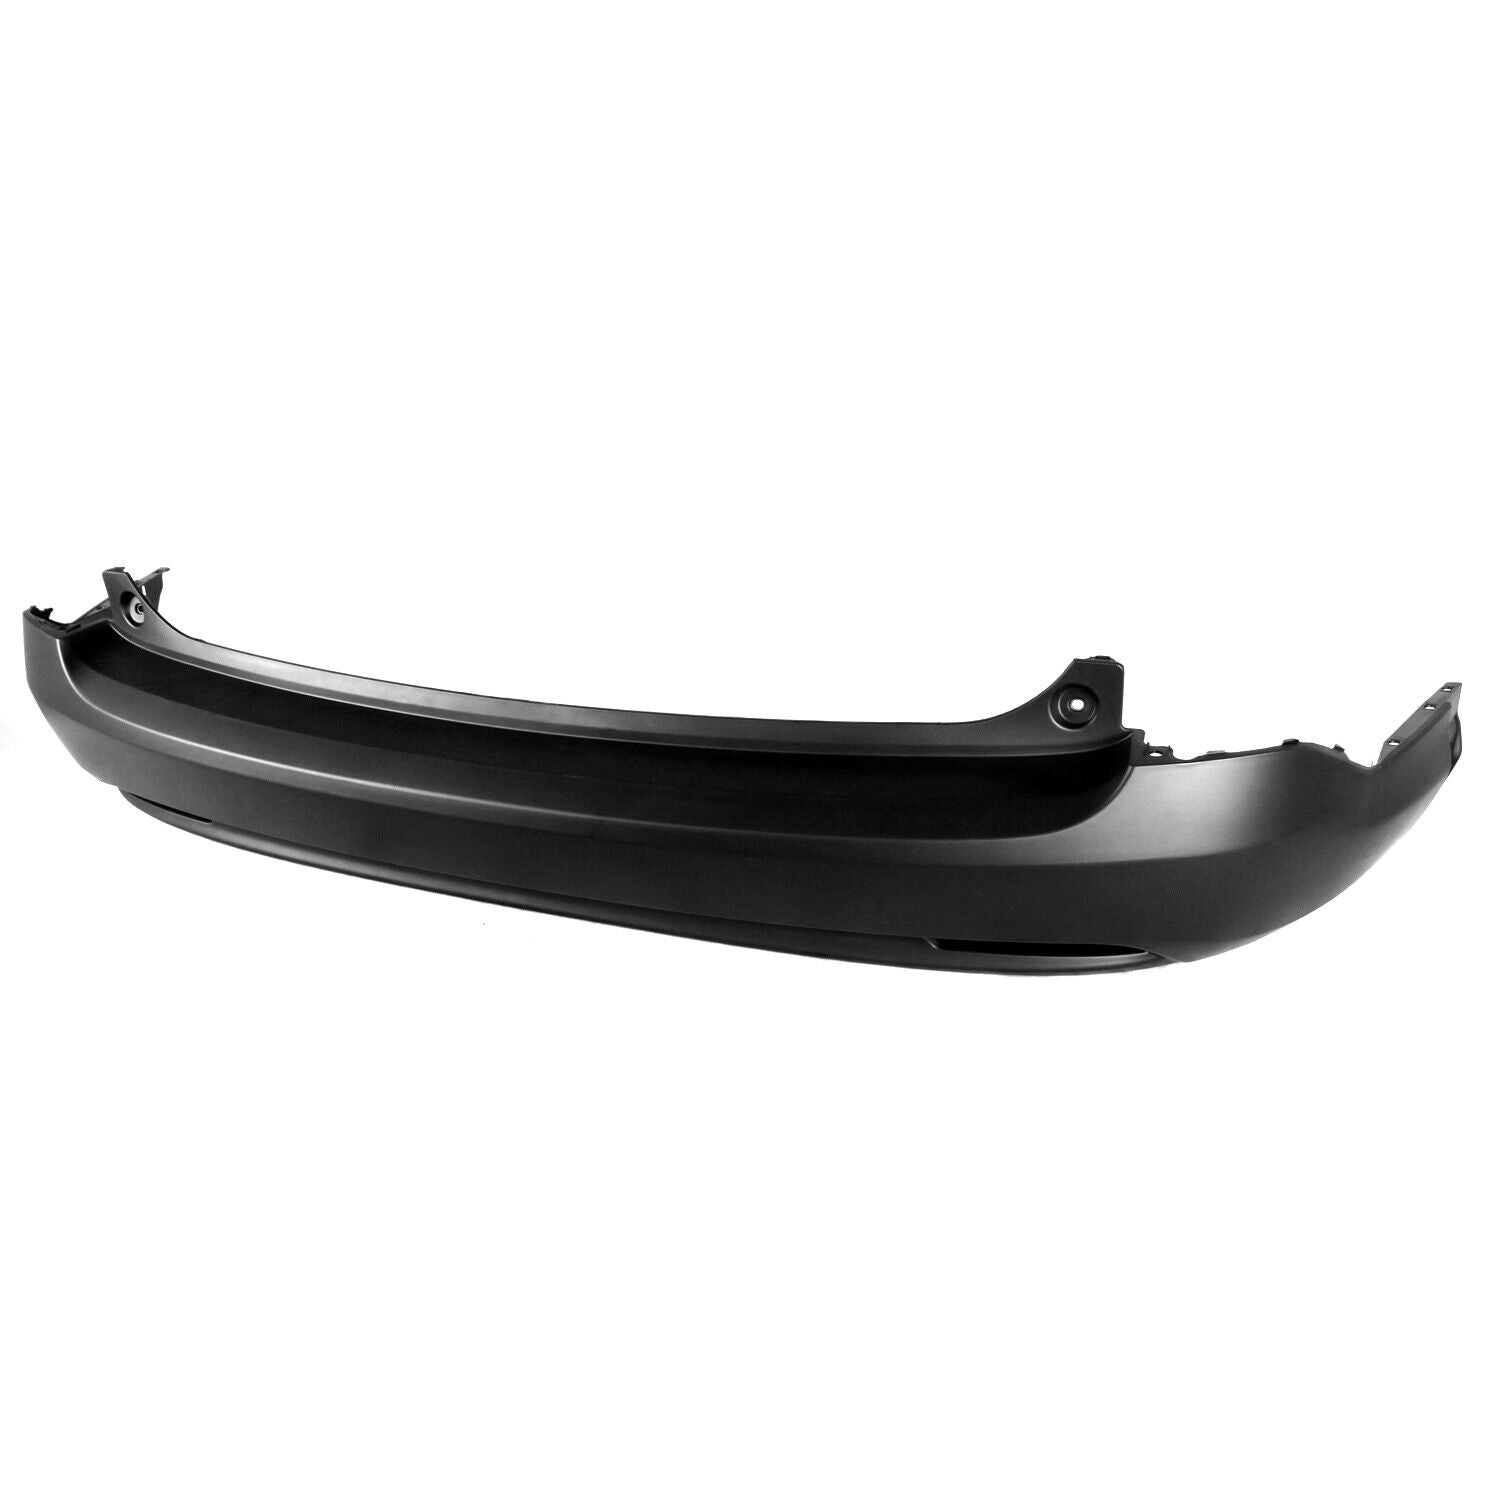 2012-2014 HONDA CR-V; Rear Bumper Cover lower; Painted to Match